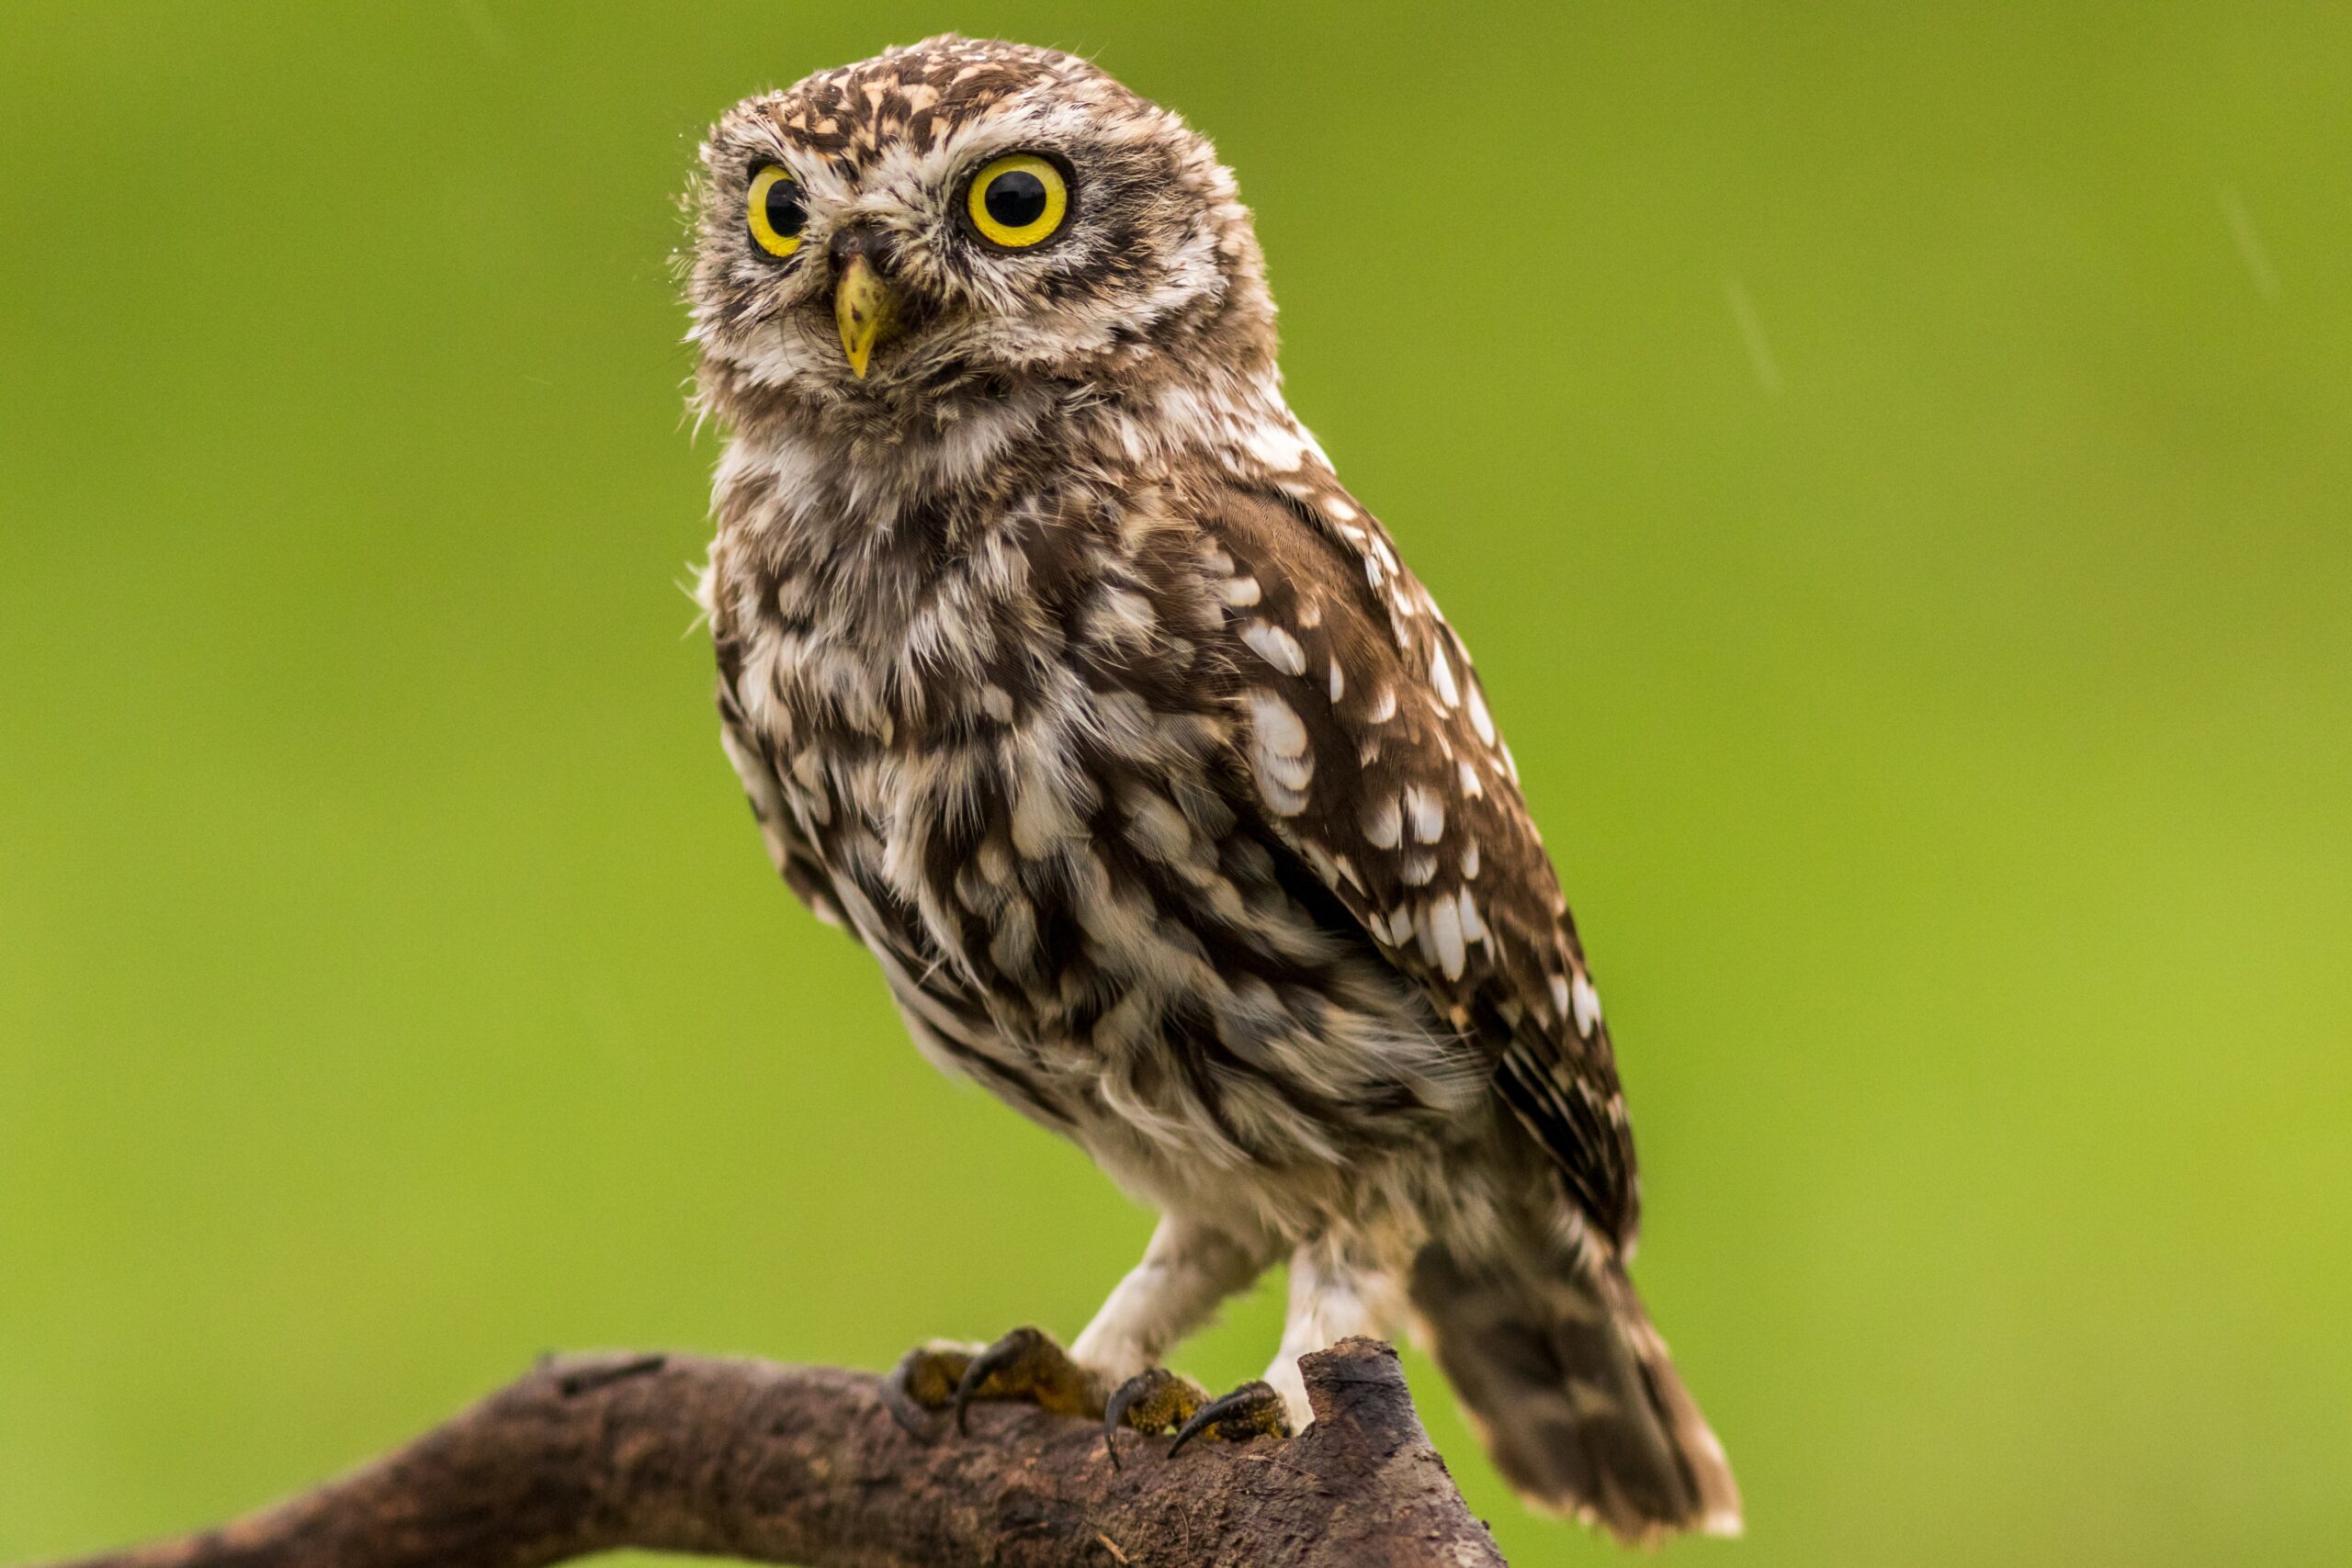 owl on a green background